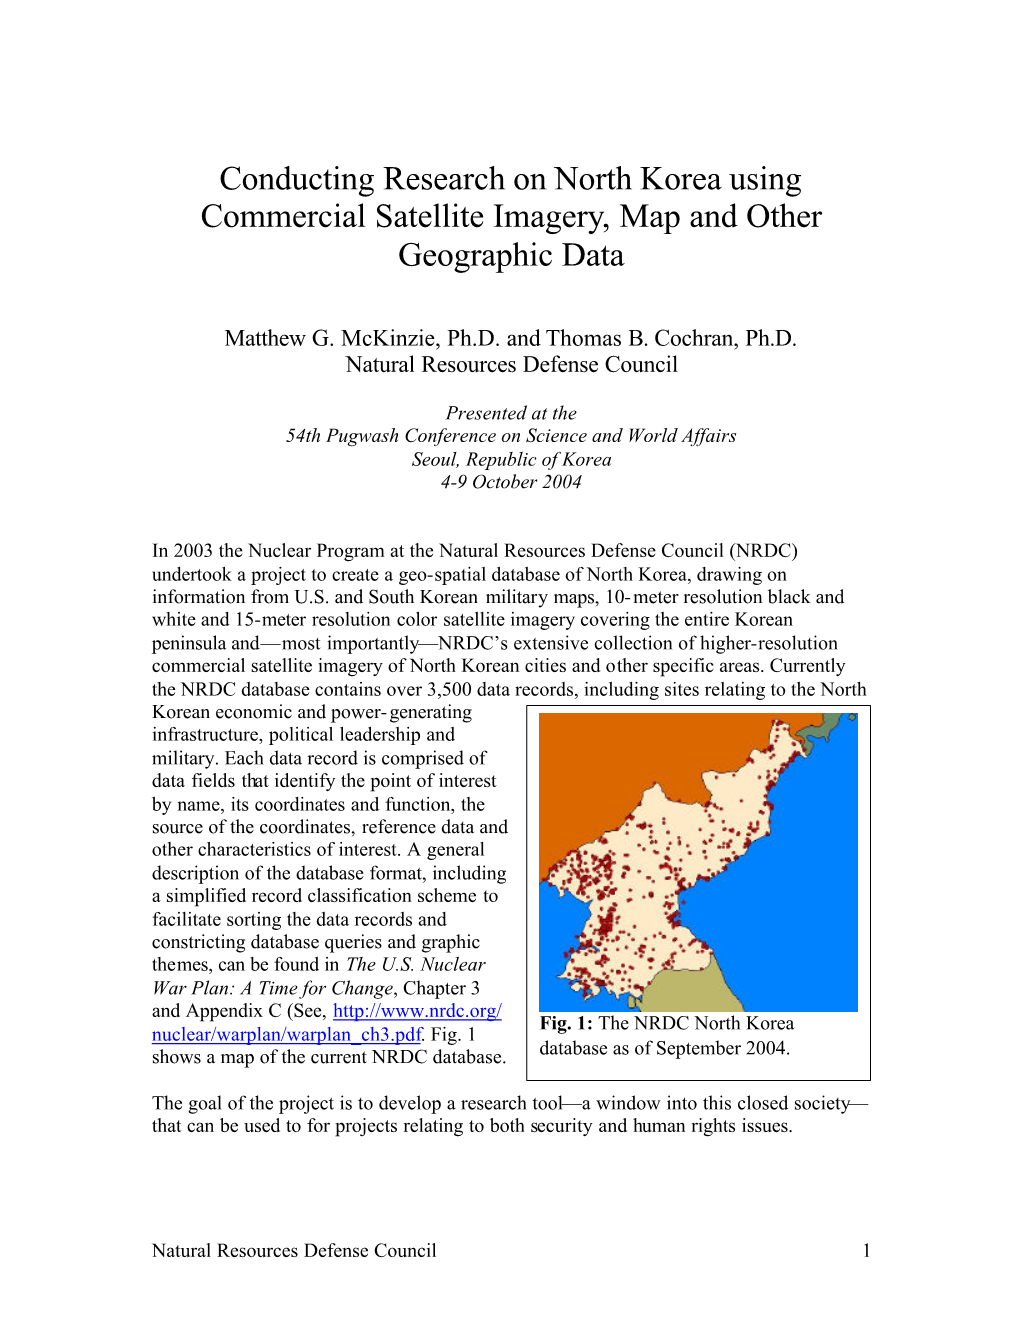 Conducting Research on North Korea Using Commercial Satellite Imagery, Map and Other Geographic Data